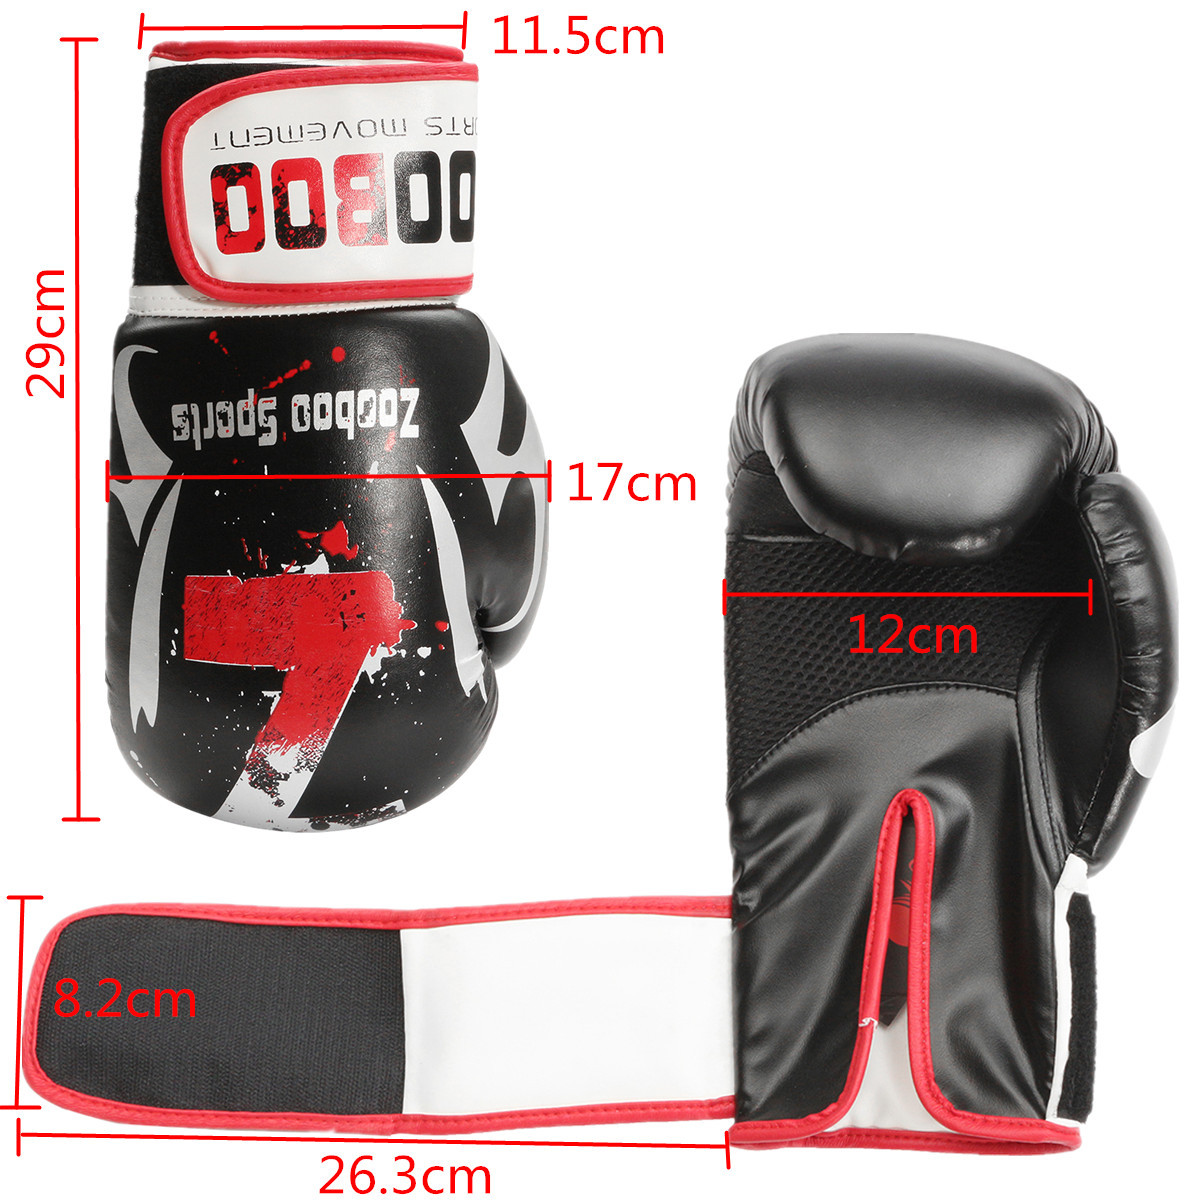 Men-1-Pair-PU-Leather-Boxing-Gloves-Mitts-Muay-Thai-Punch-Bag-Sparring-MMA-Training-1122143